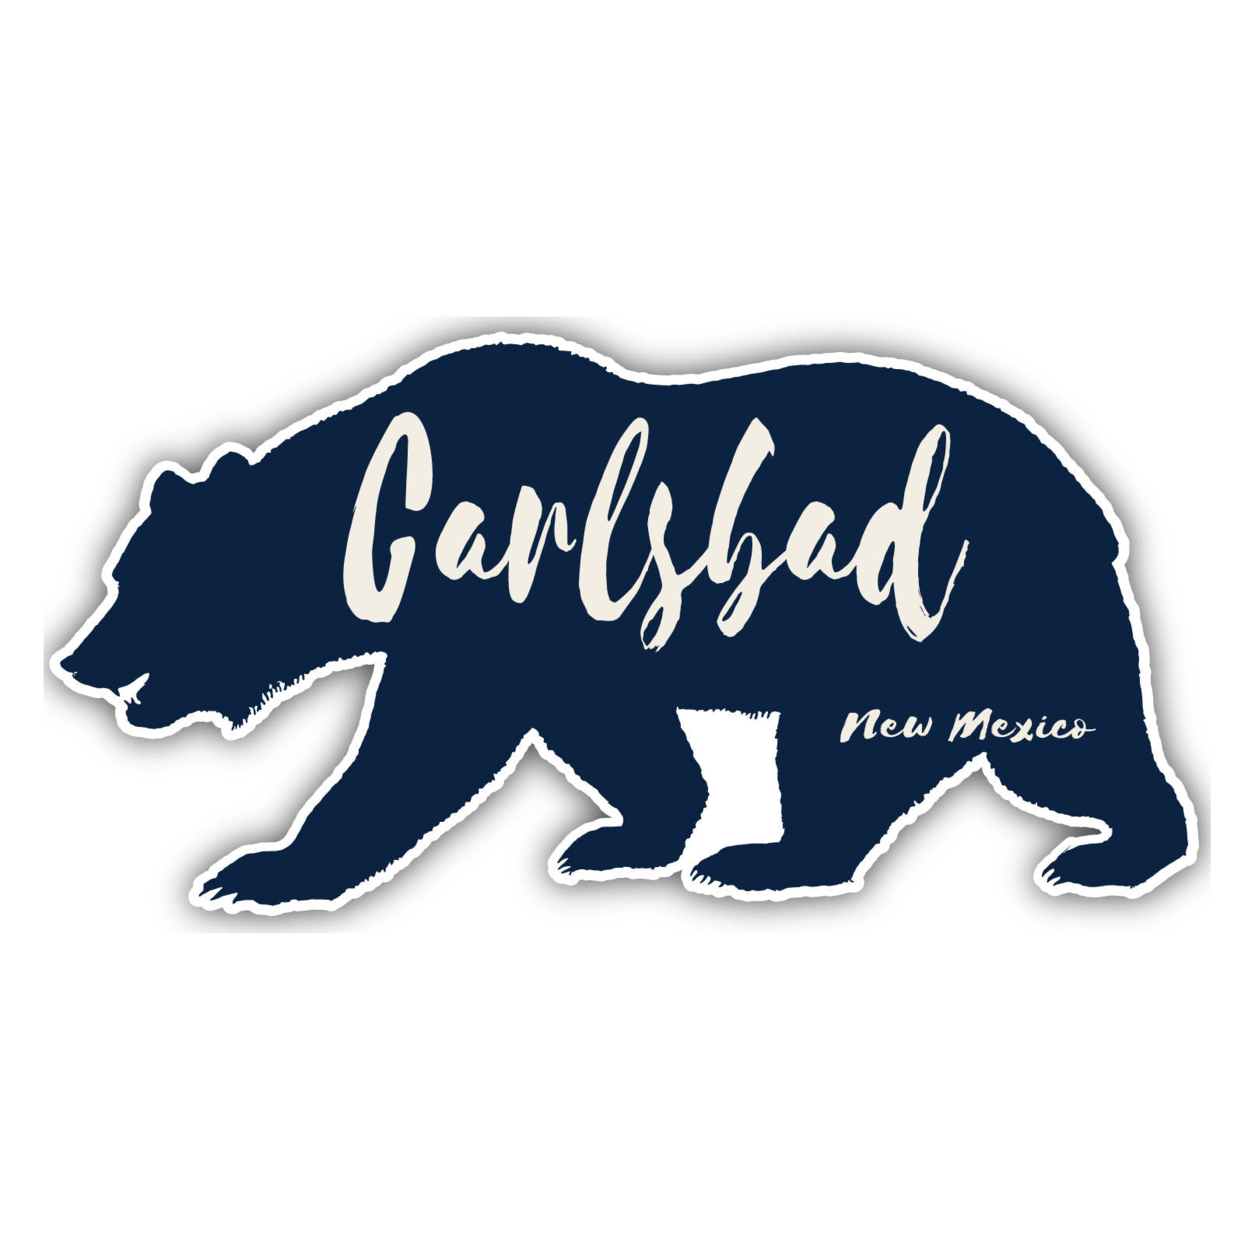 Carlsbad New Mexico Souvenir Decorative Stickers (Choose Theme And Size) - 4-Pack, 8-Inch, Bear